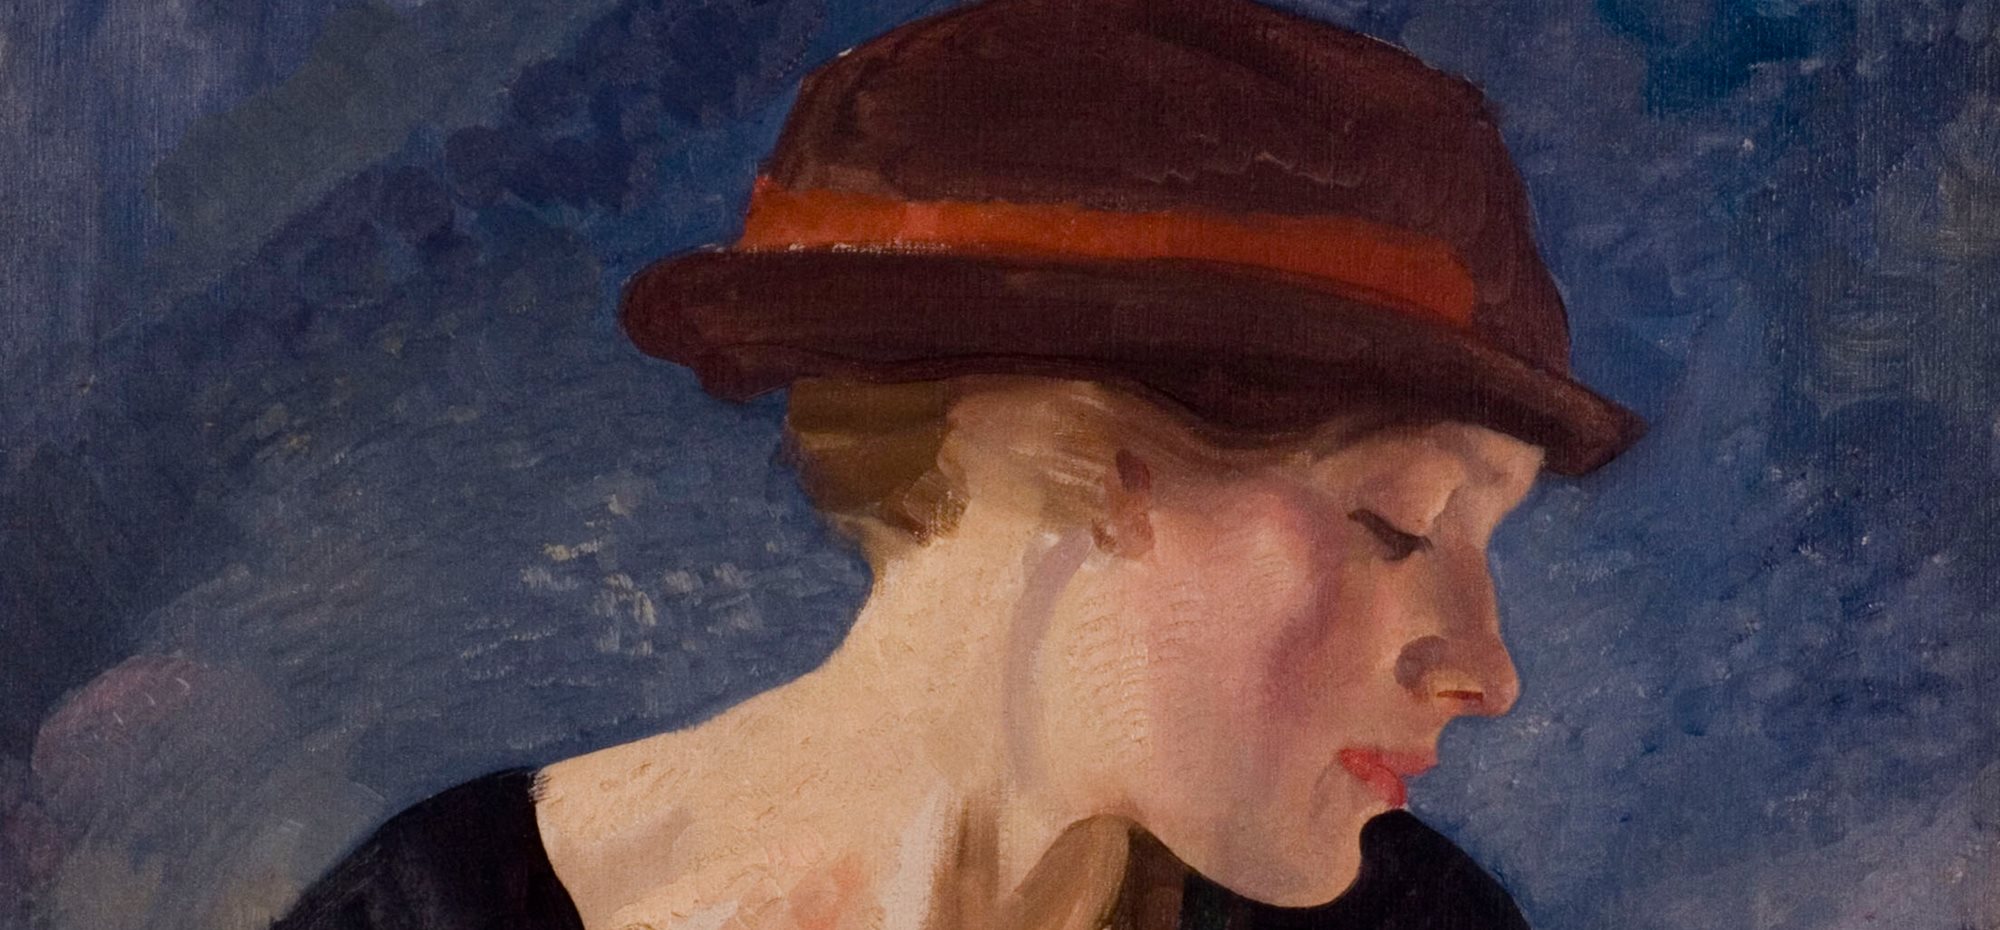 George W LAMBERT Portrait: red trimmed hat c1921 (detail) oil on canvas 74.2 x 62.1cm Gift of Mrs Maurice Lambert 1970 Newcastle Art Gallery collection